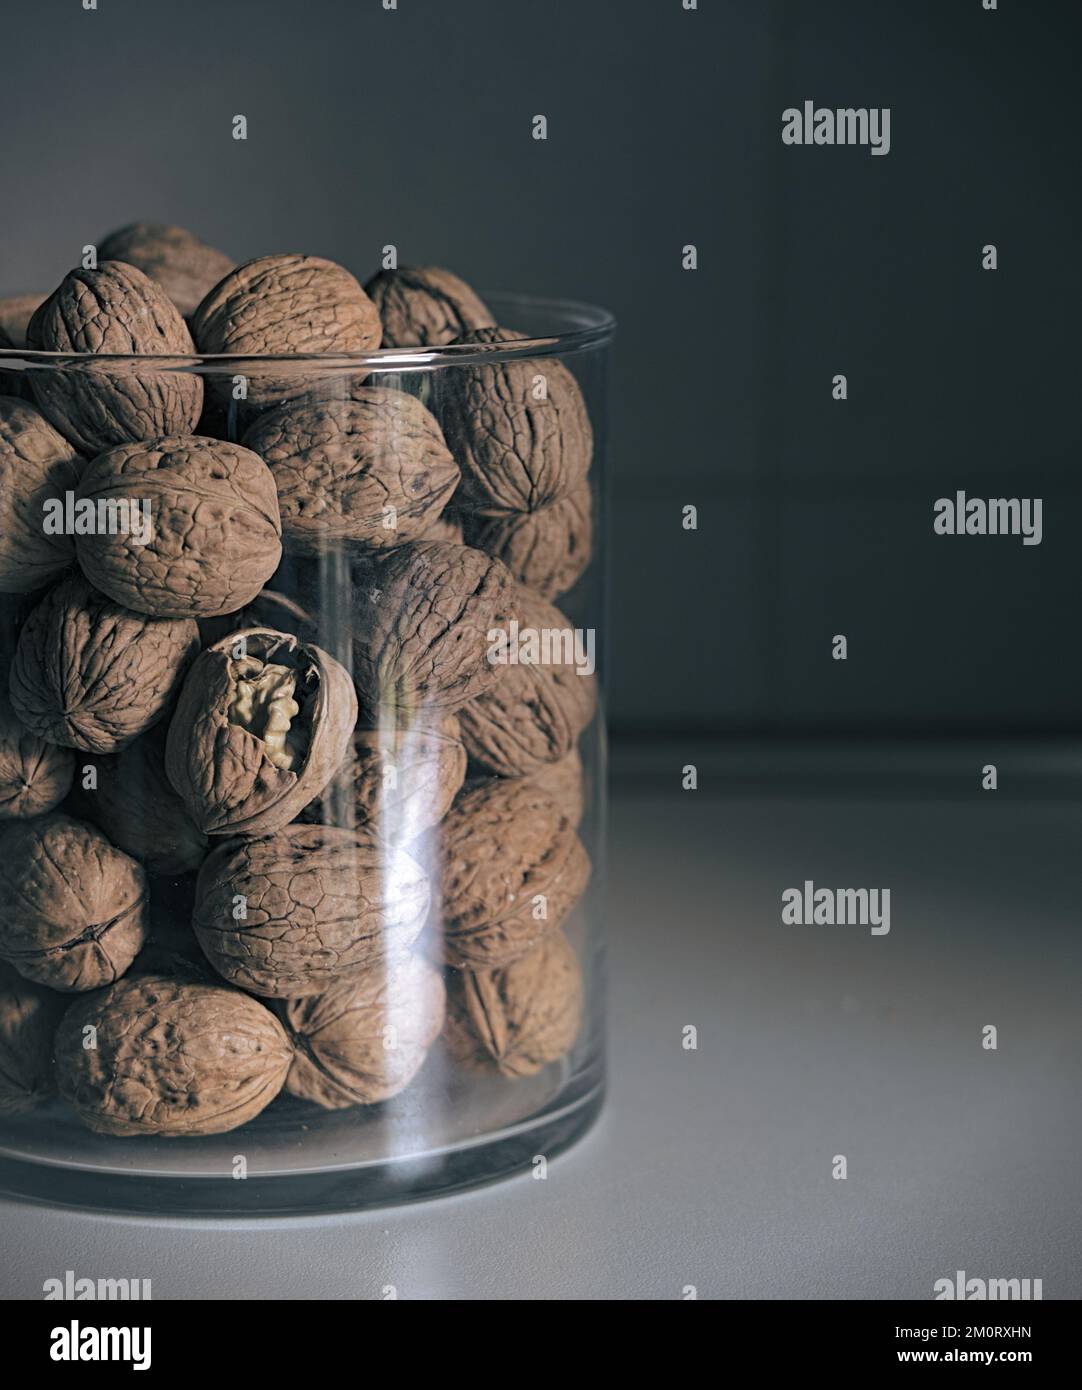 a glass container filled with nuts Stock Photo